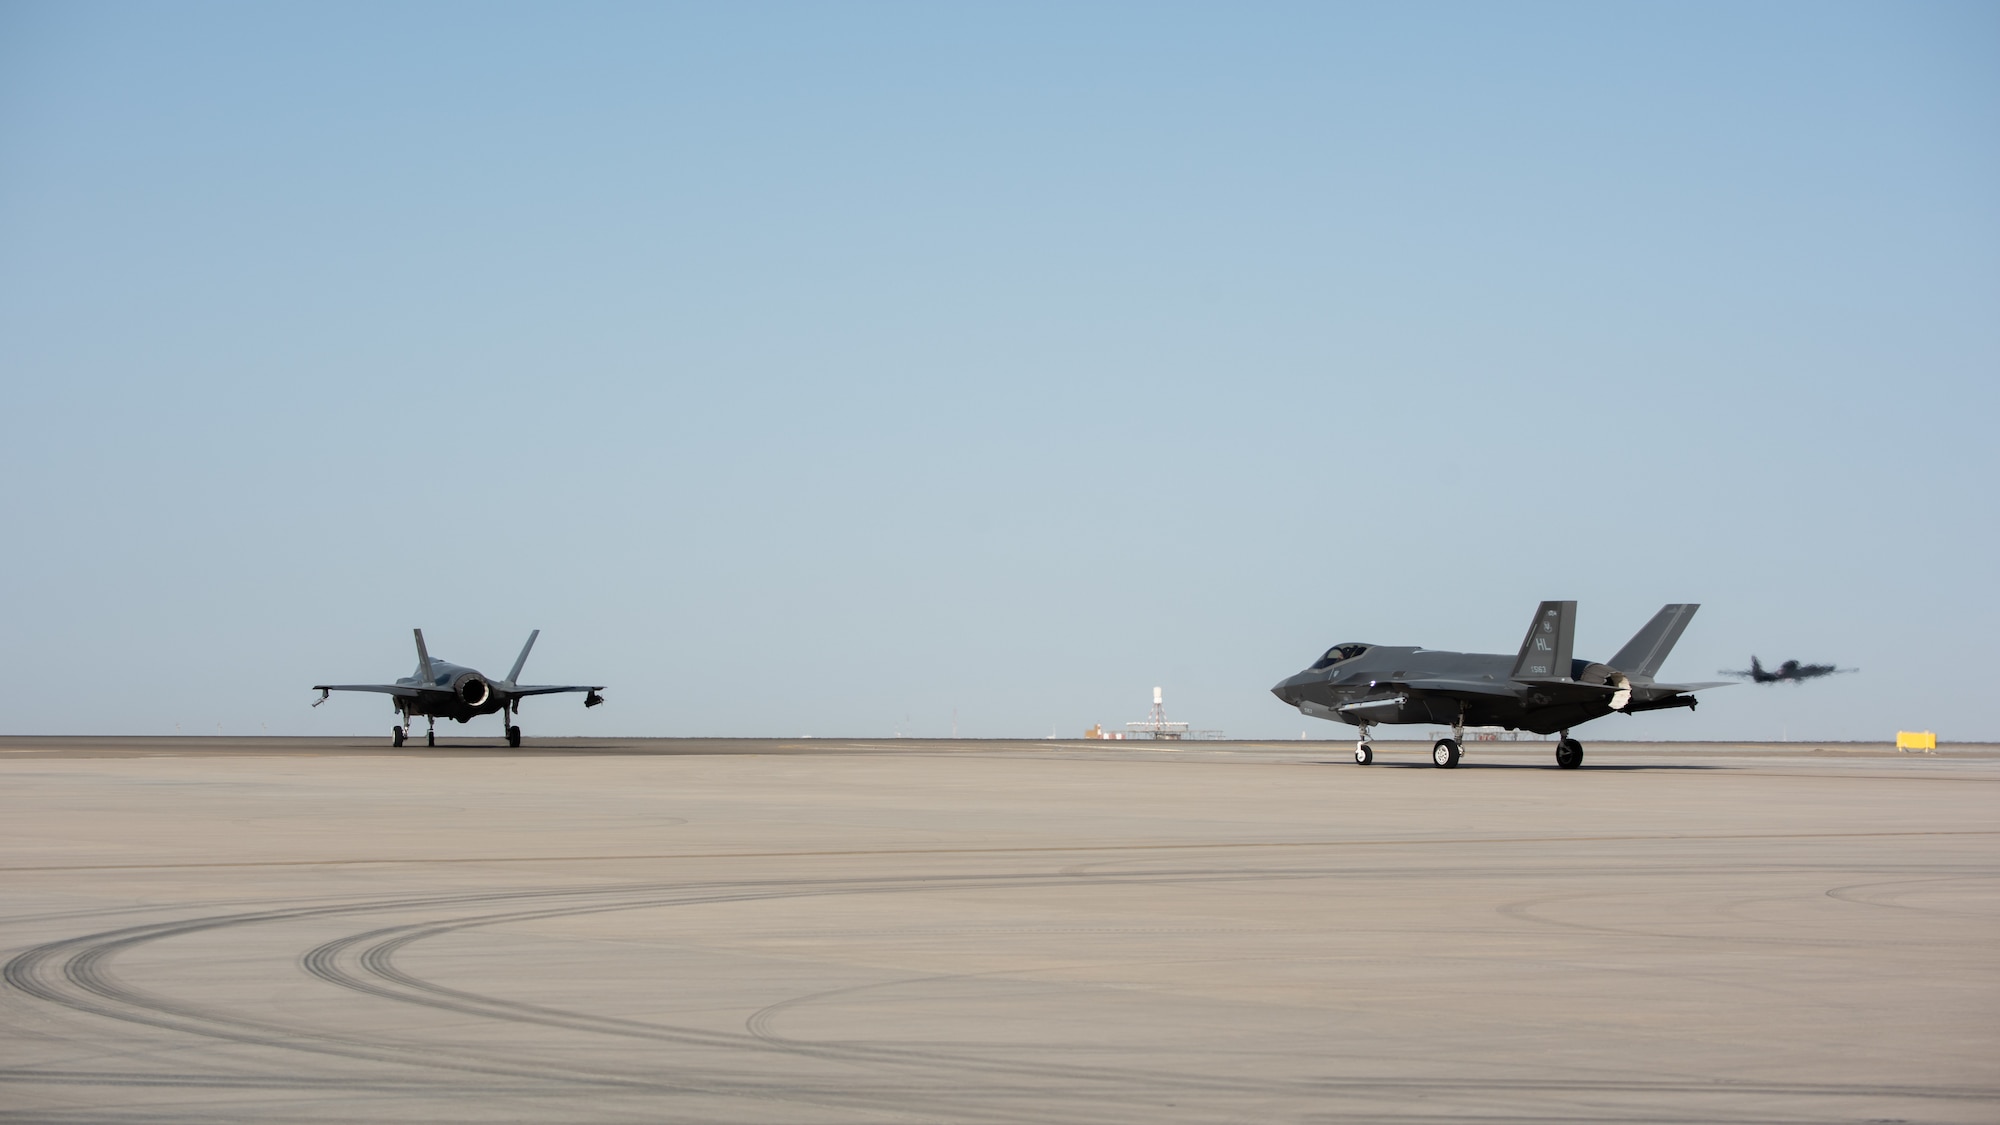 Two F-35A Lightning IIs taxi before takeoff April 26, 2019, at Al Dhafra Air Base, United Arab Emirates.